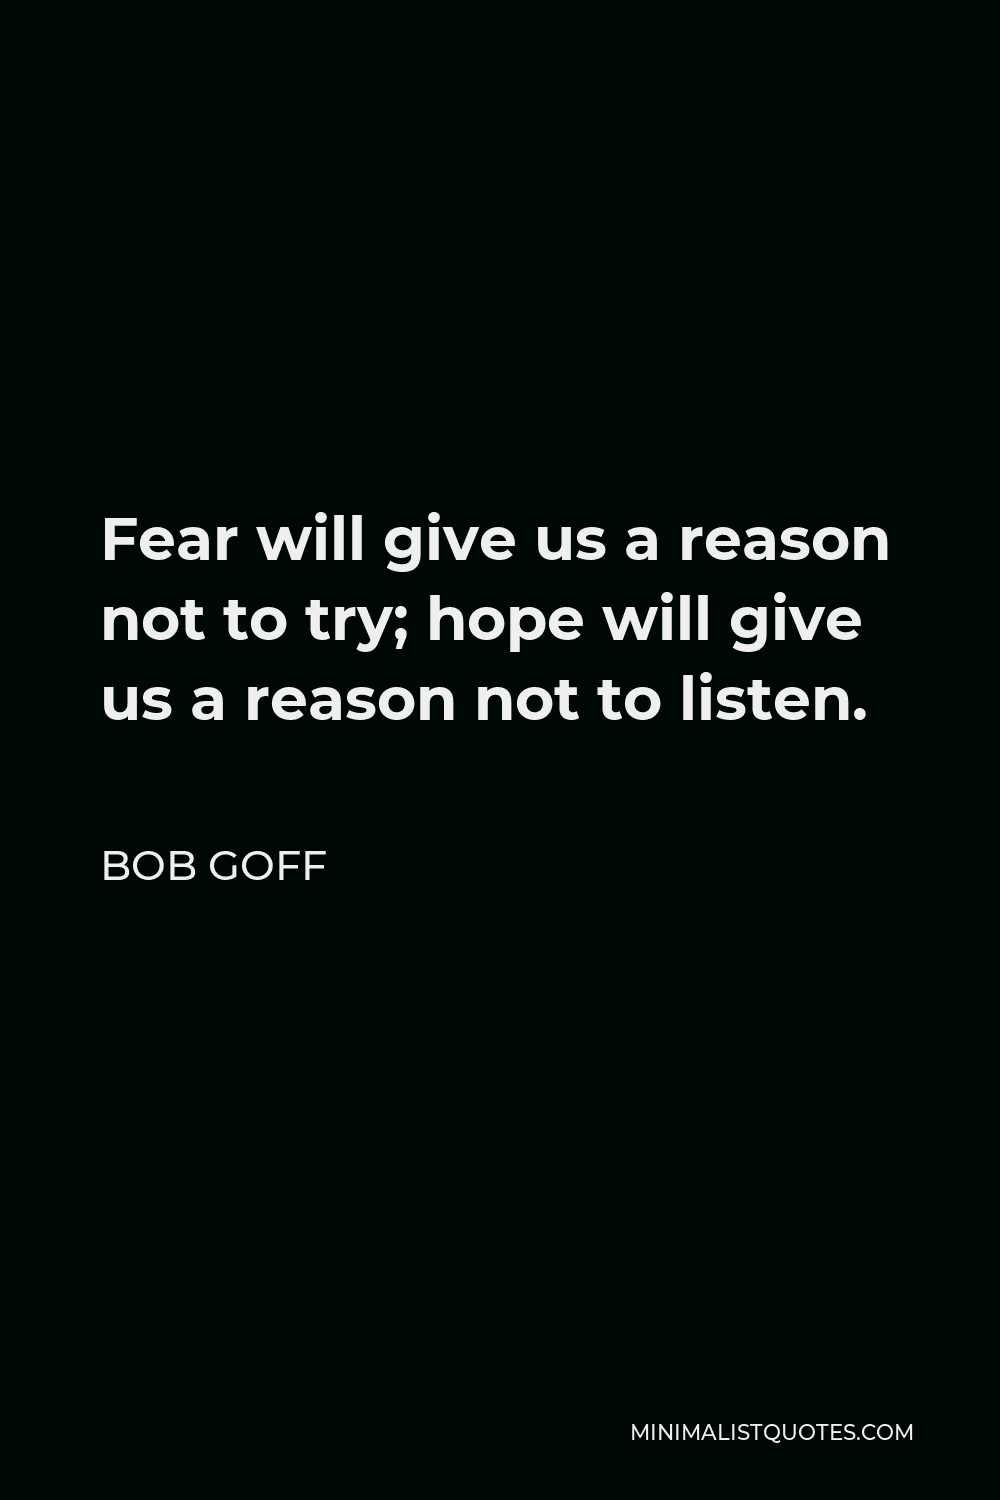 Bob Goff Quote - Fear will give us a reason not to try; hope will give us a reason not to listen.